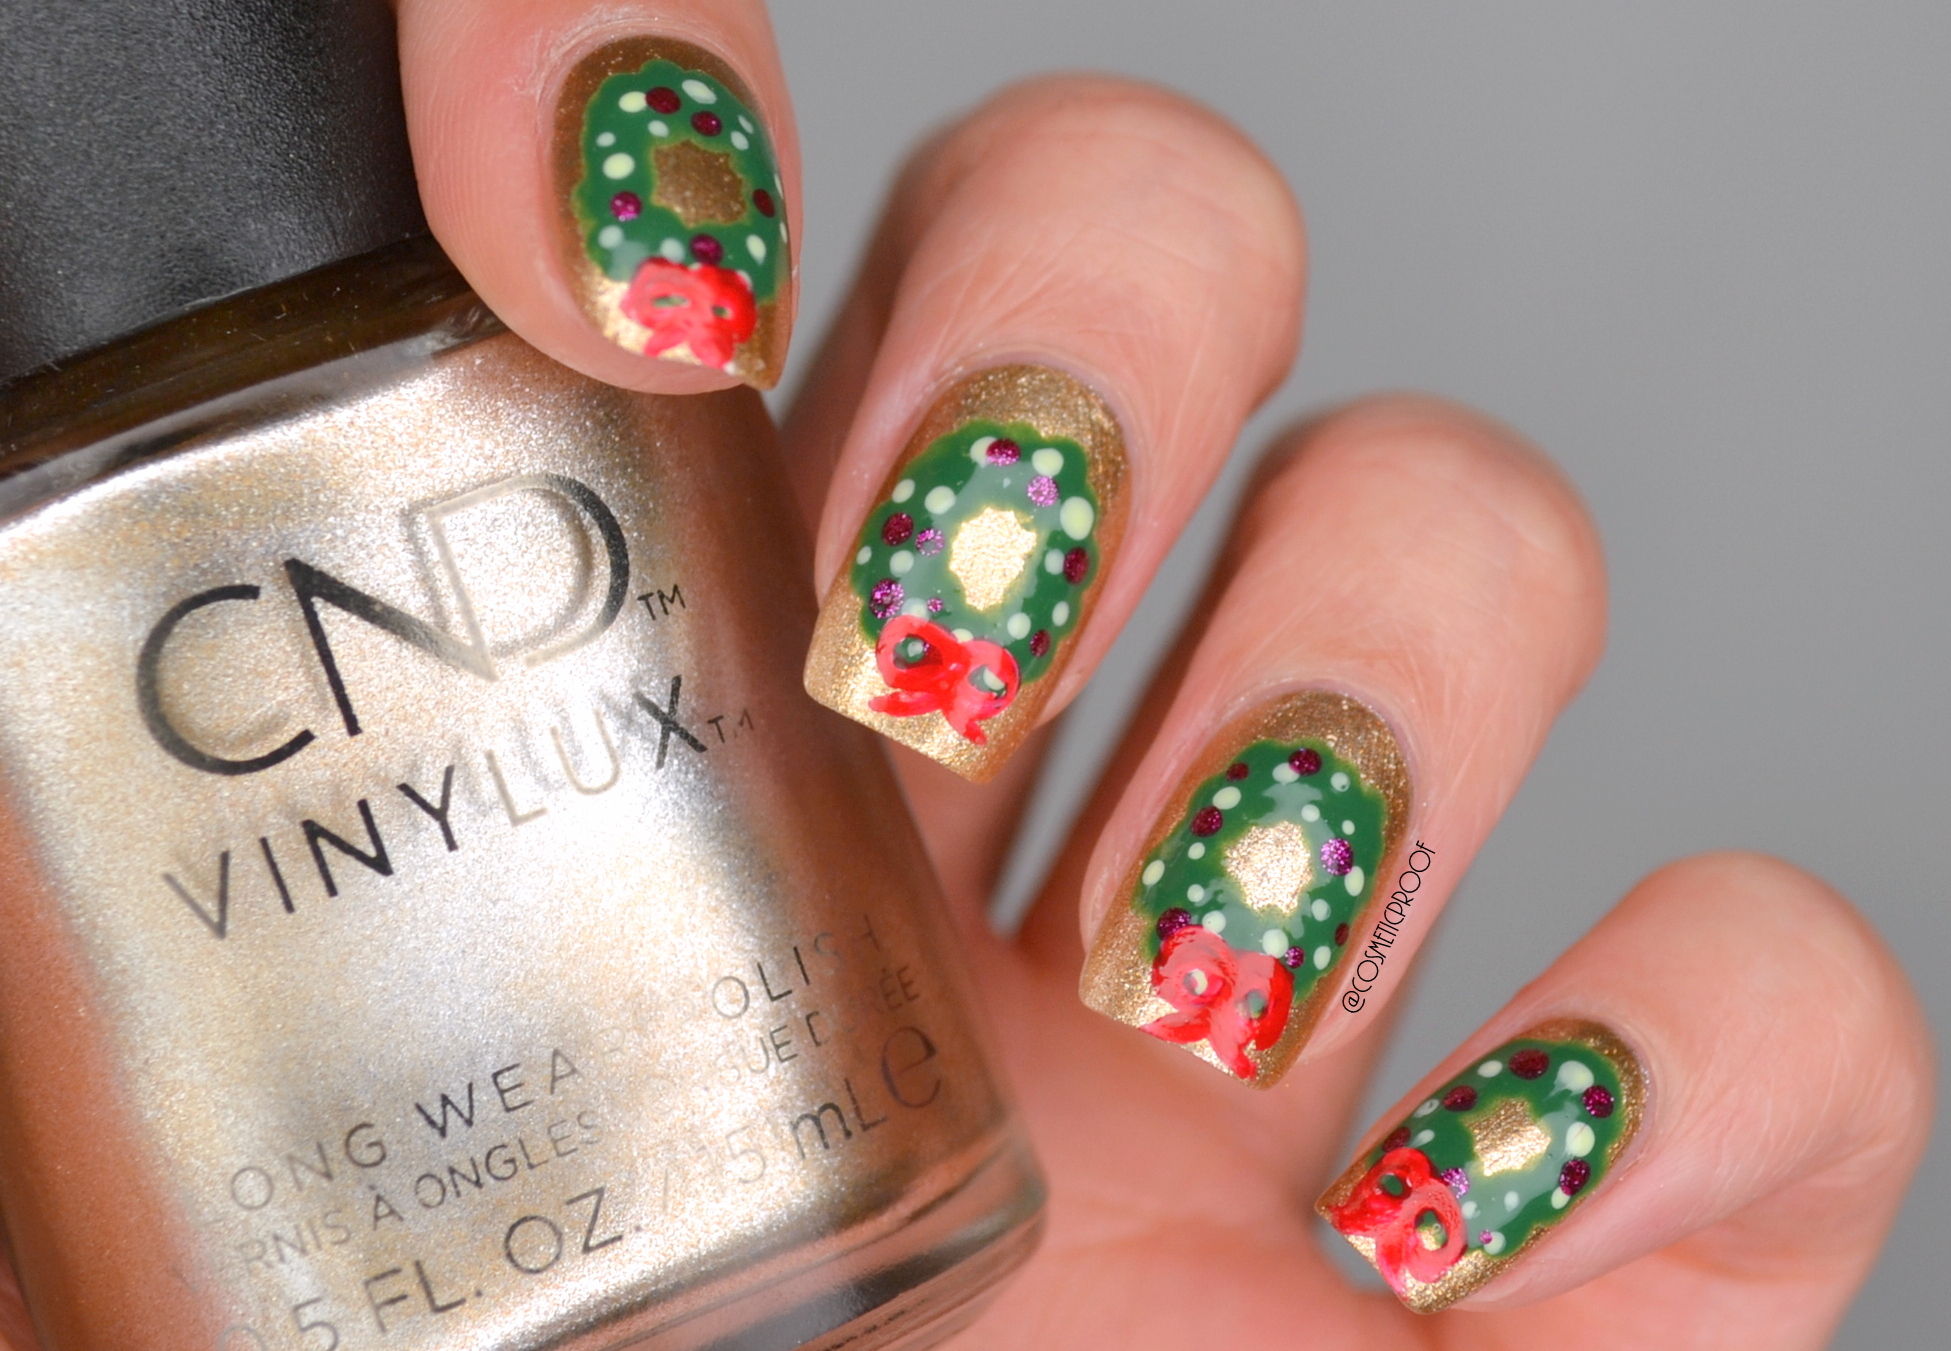 6. "Holiday Nail Art Tutorial: Christmas Present Design" - wide 3